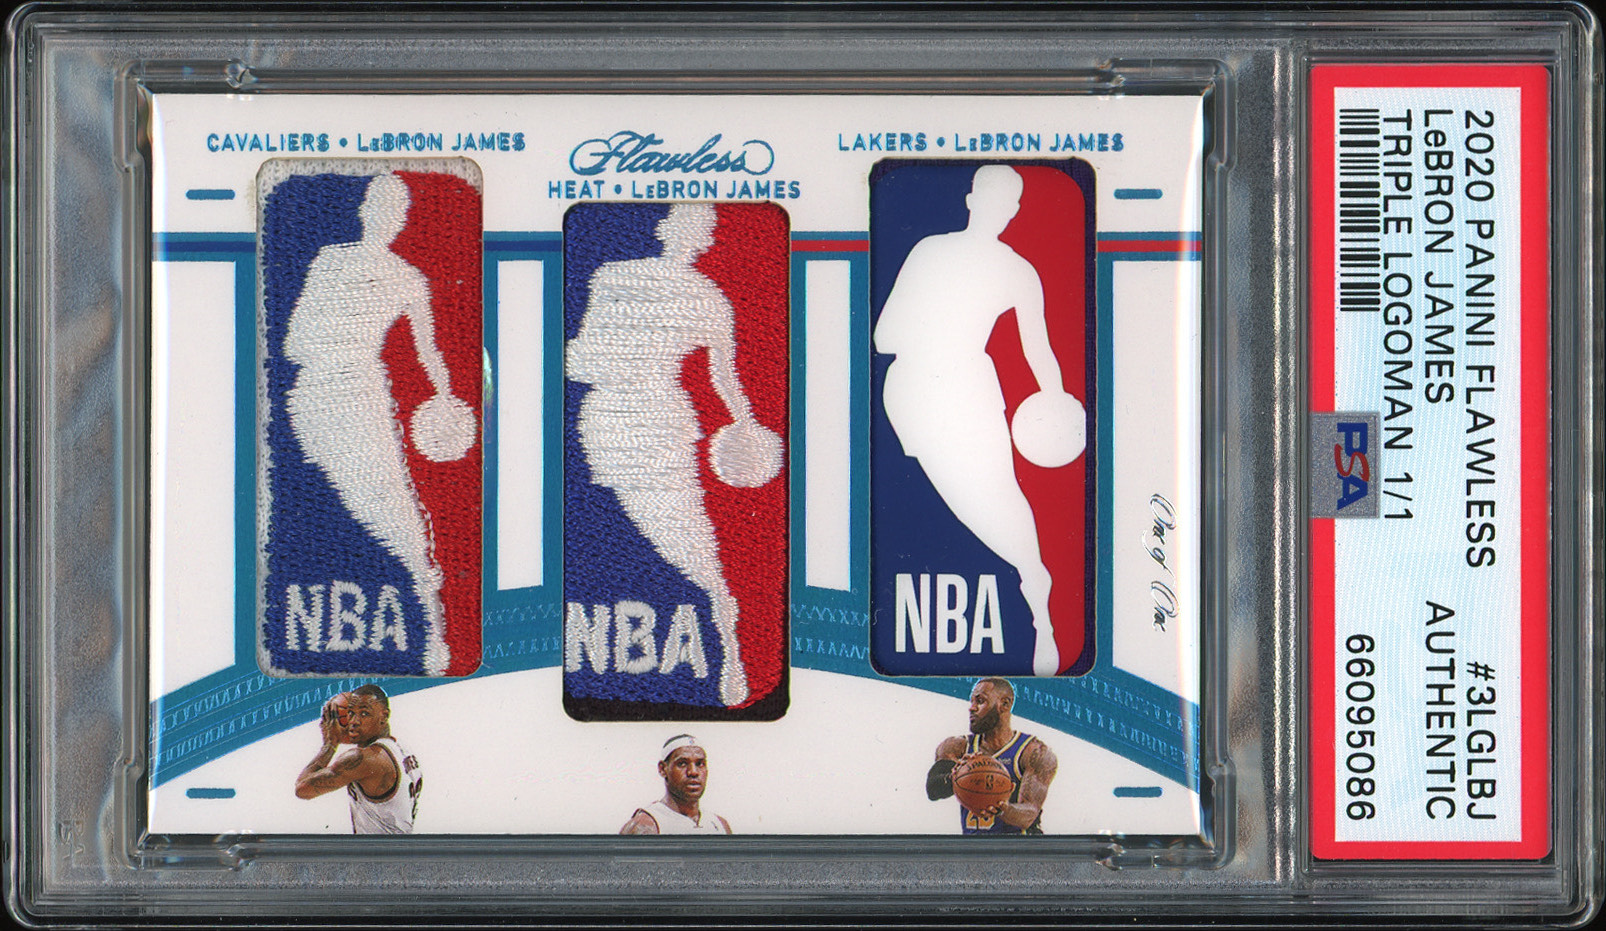 Signed LeBron James rookie card shatters records at auction